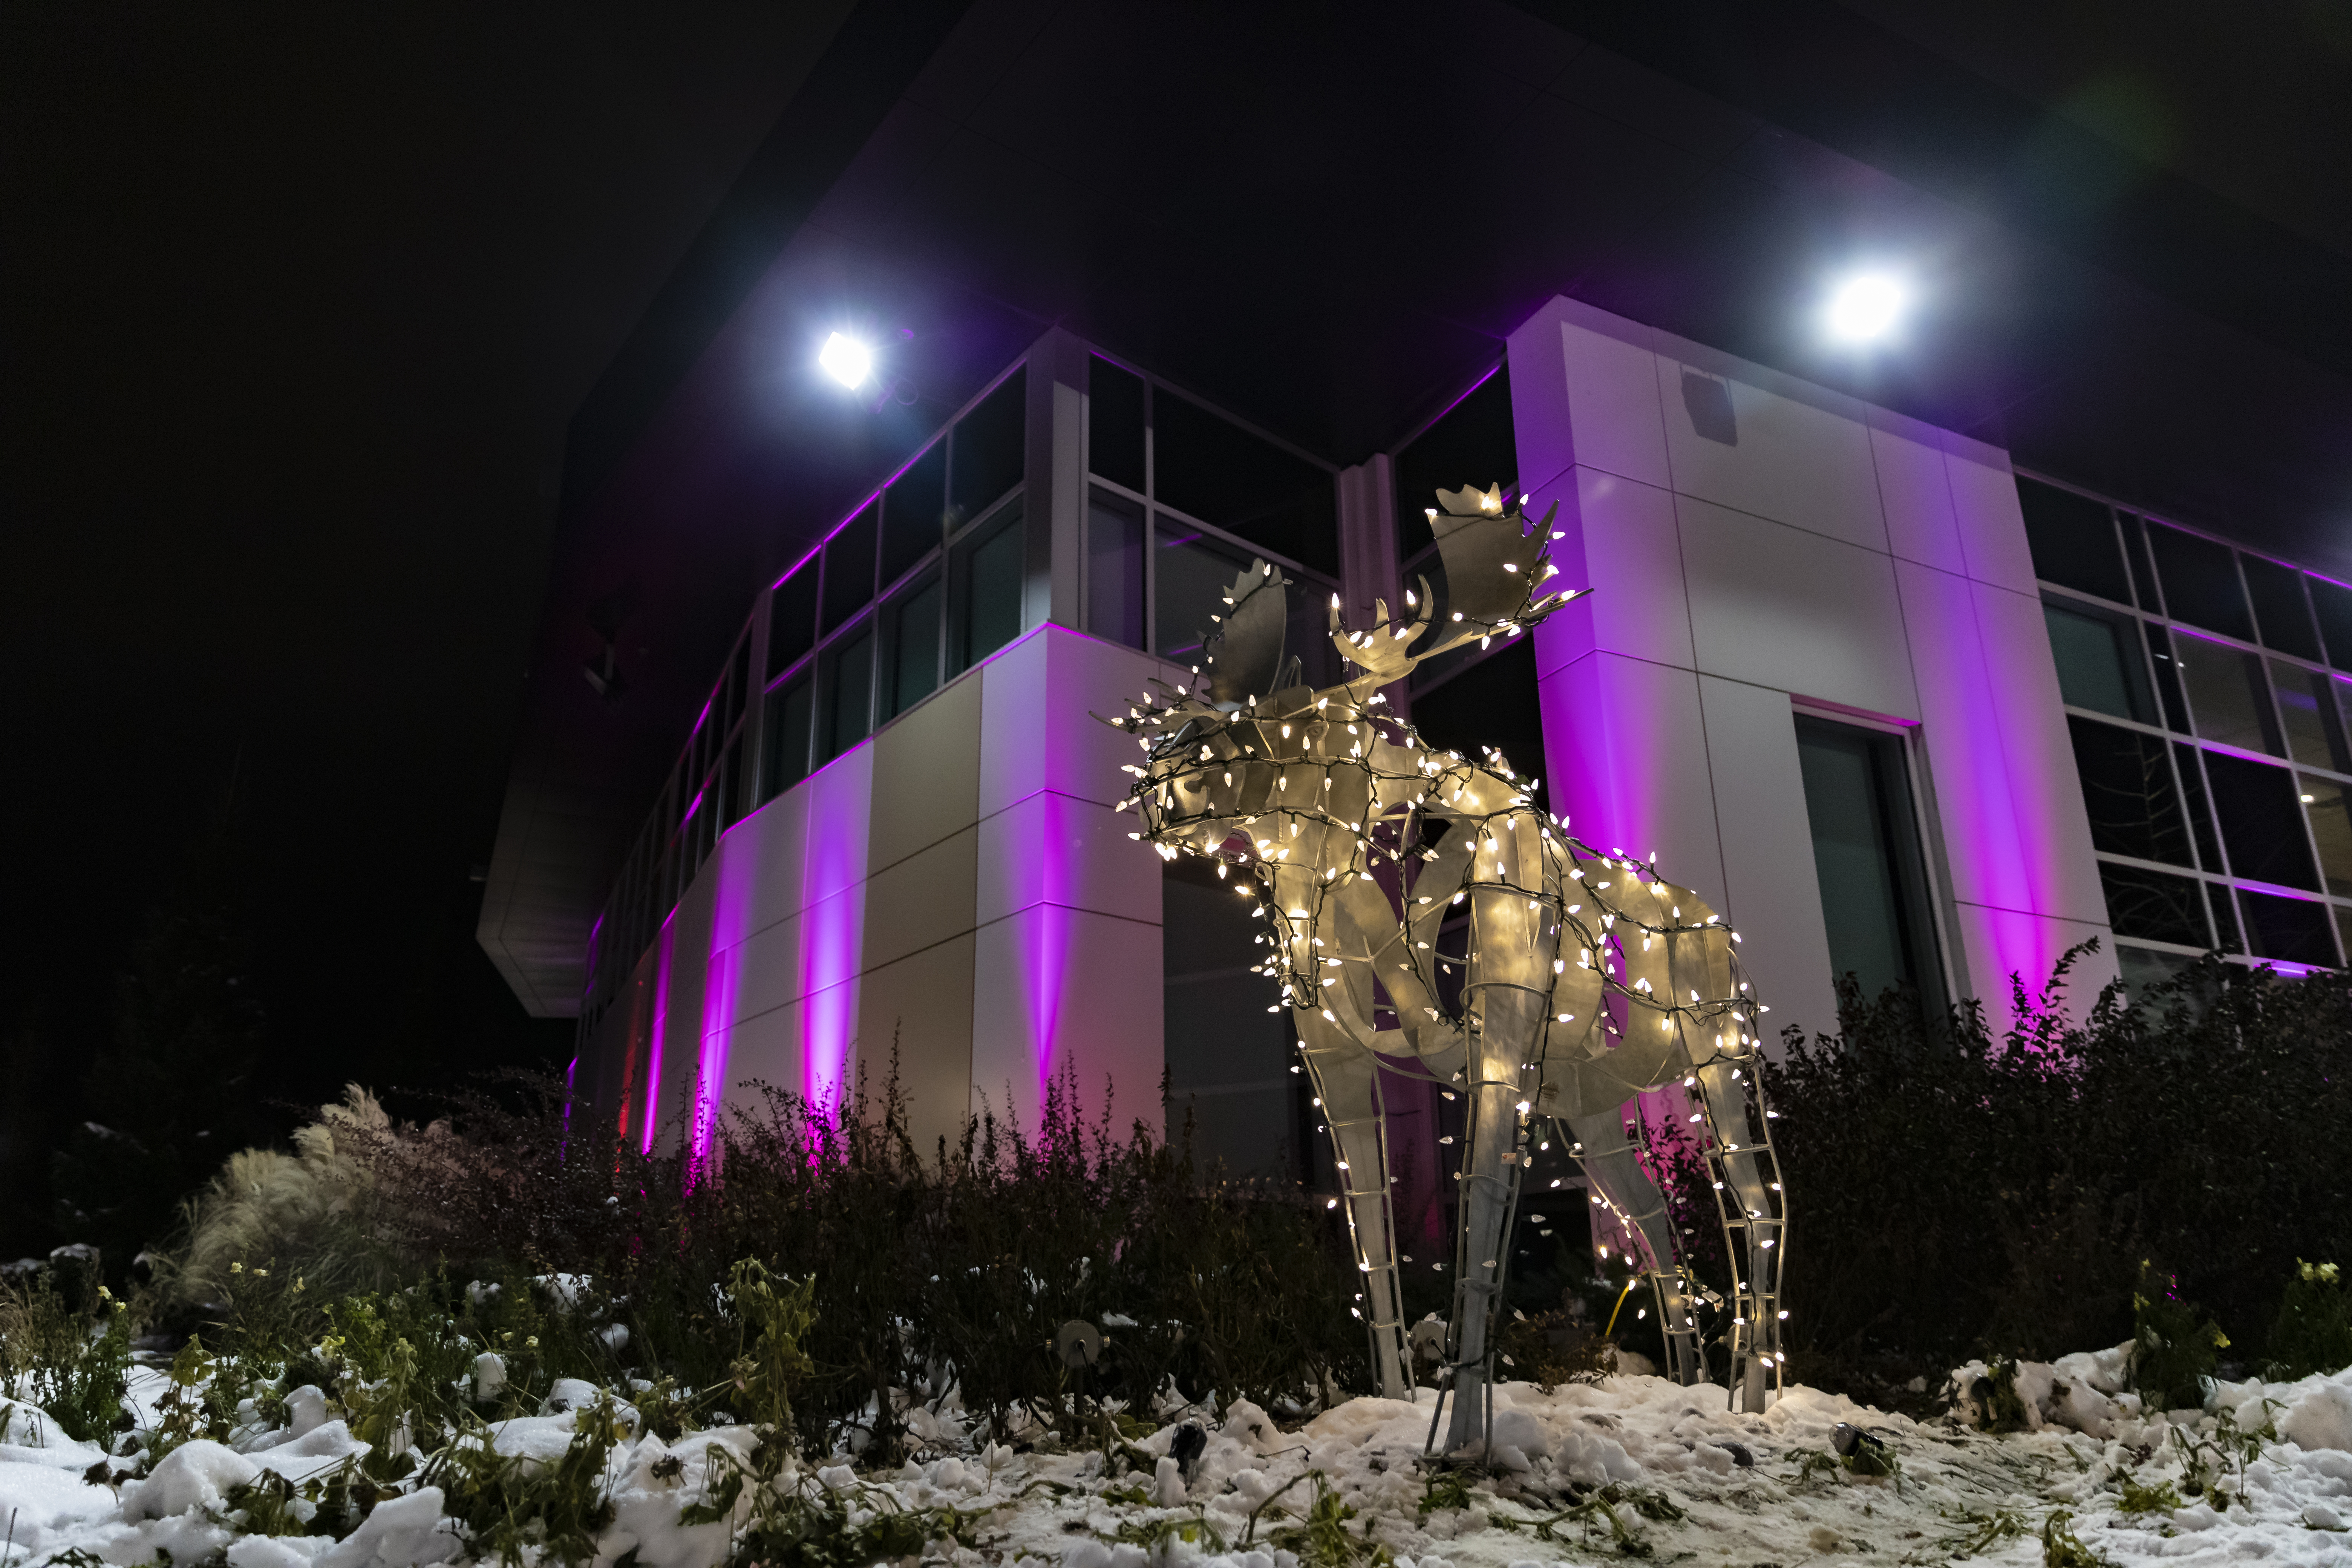 Oshawa City Hall lit with purple lights and a moose statue with white lights.